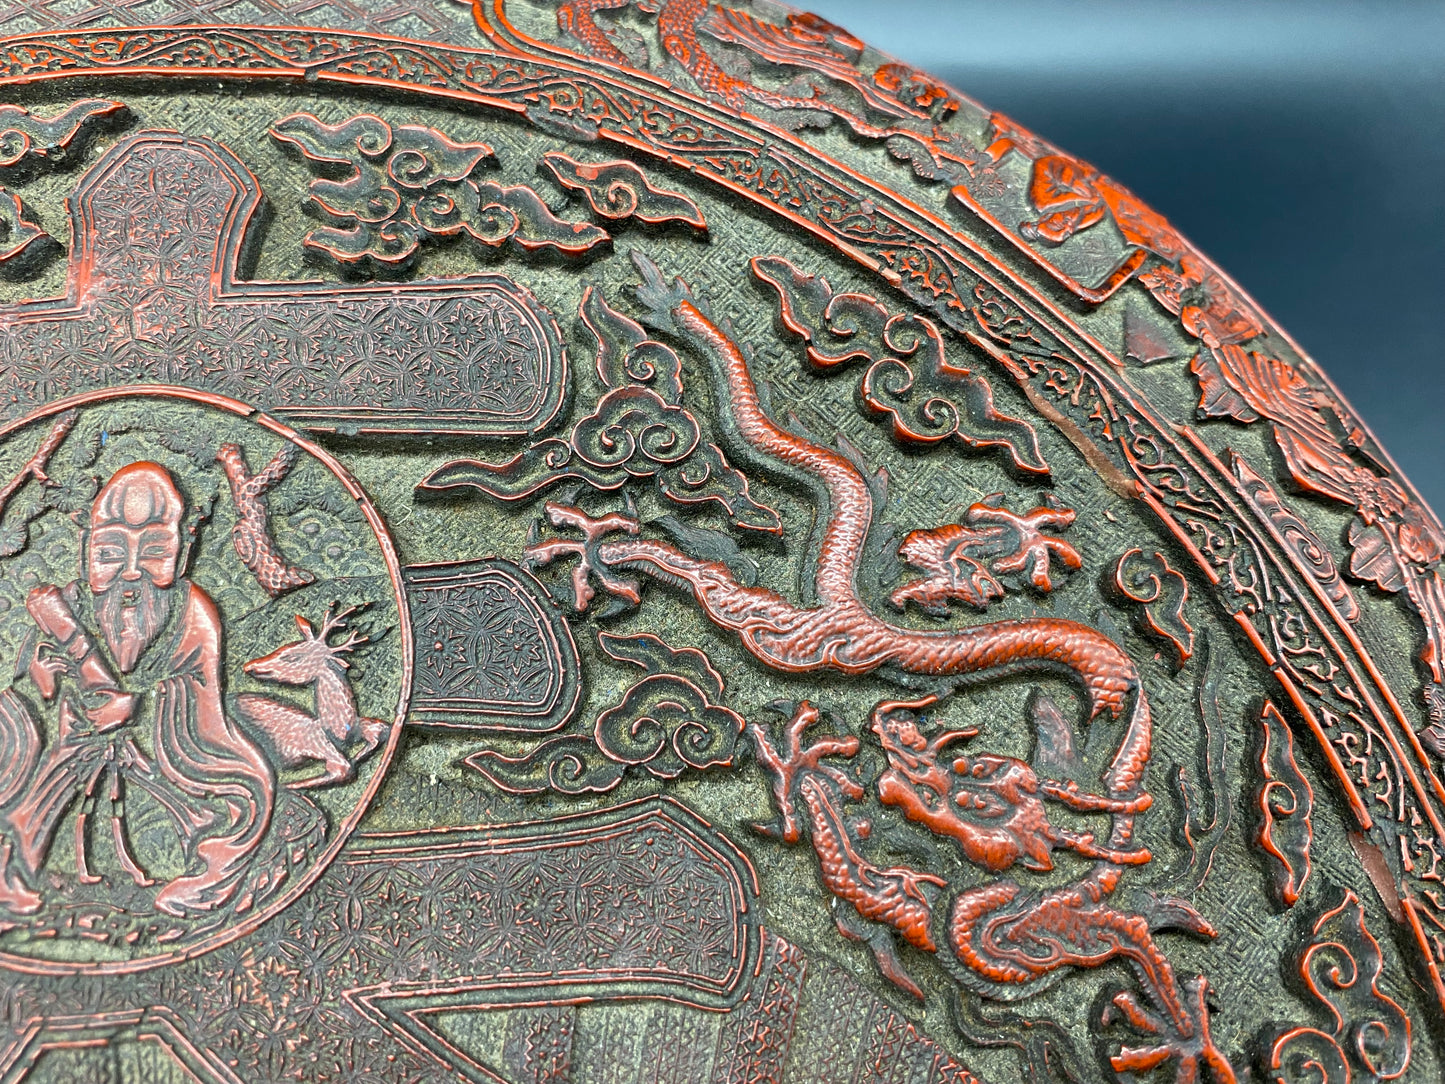 CHINESE ANTIQUES ONLINE - LARGE CINNABAR LACQUER 'DRAGON' BOX AND COVER QING DYNASTY